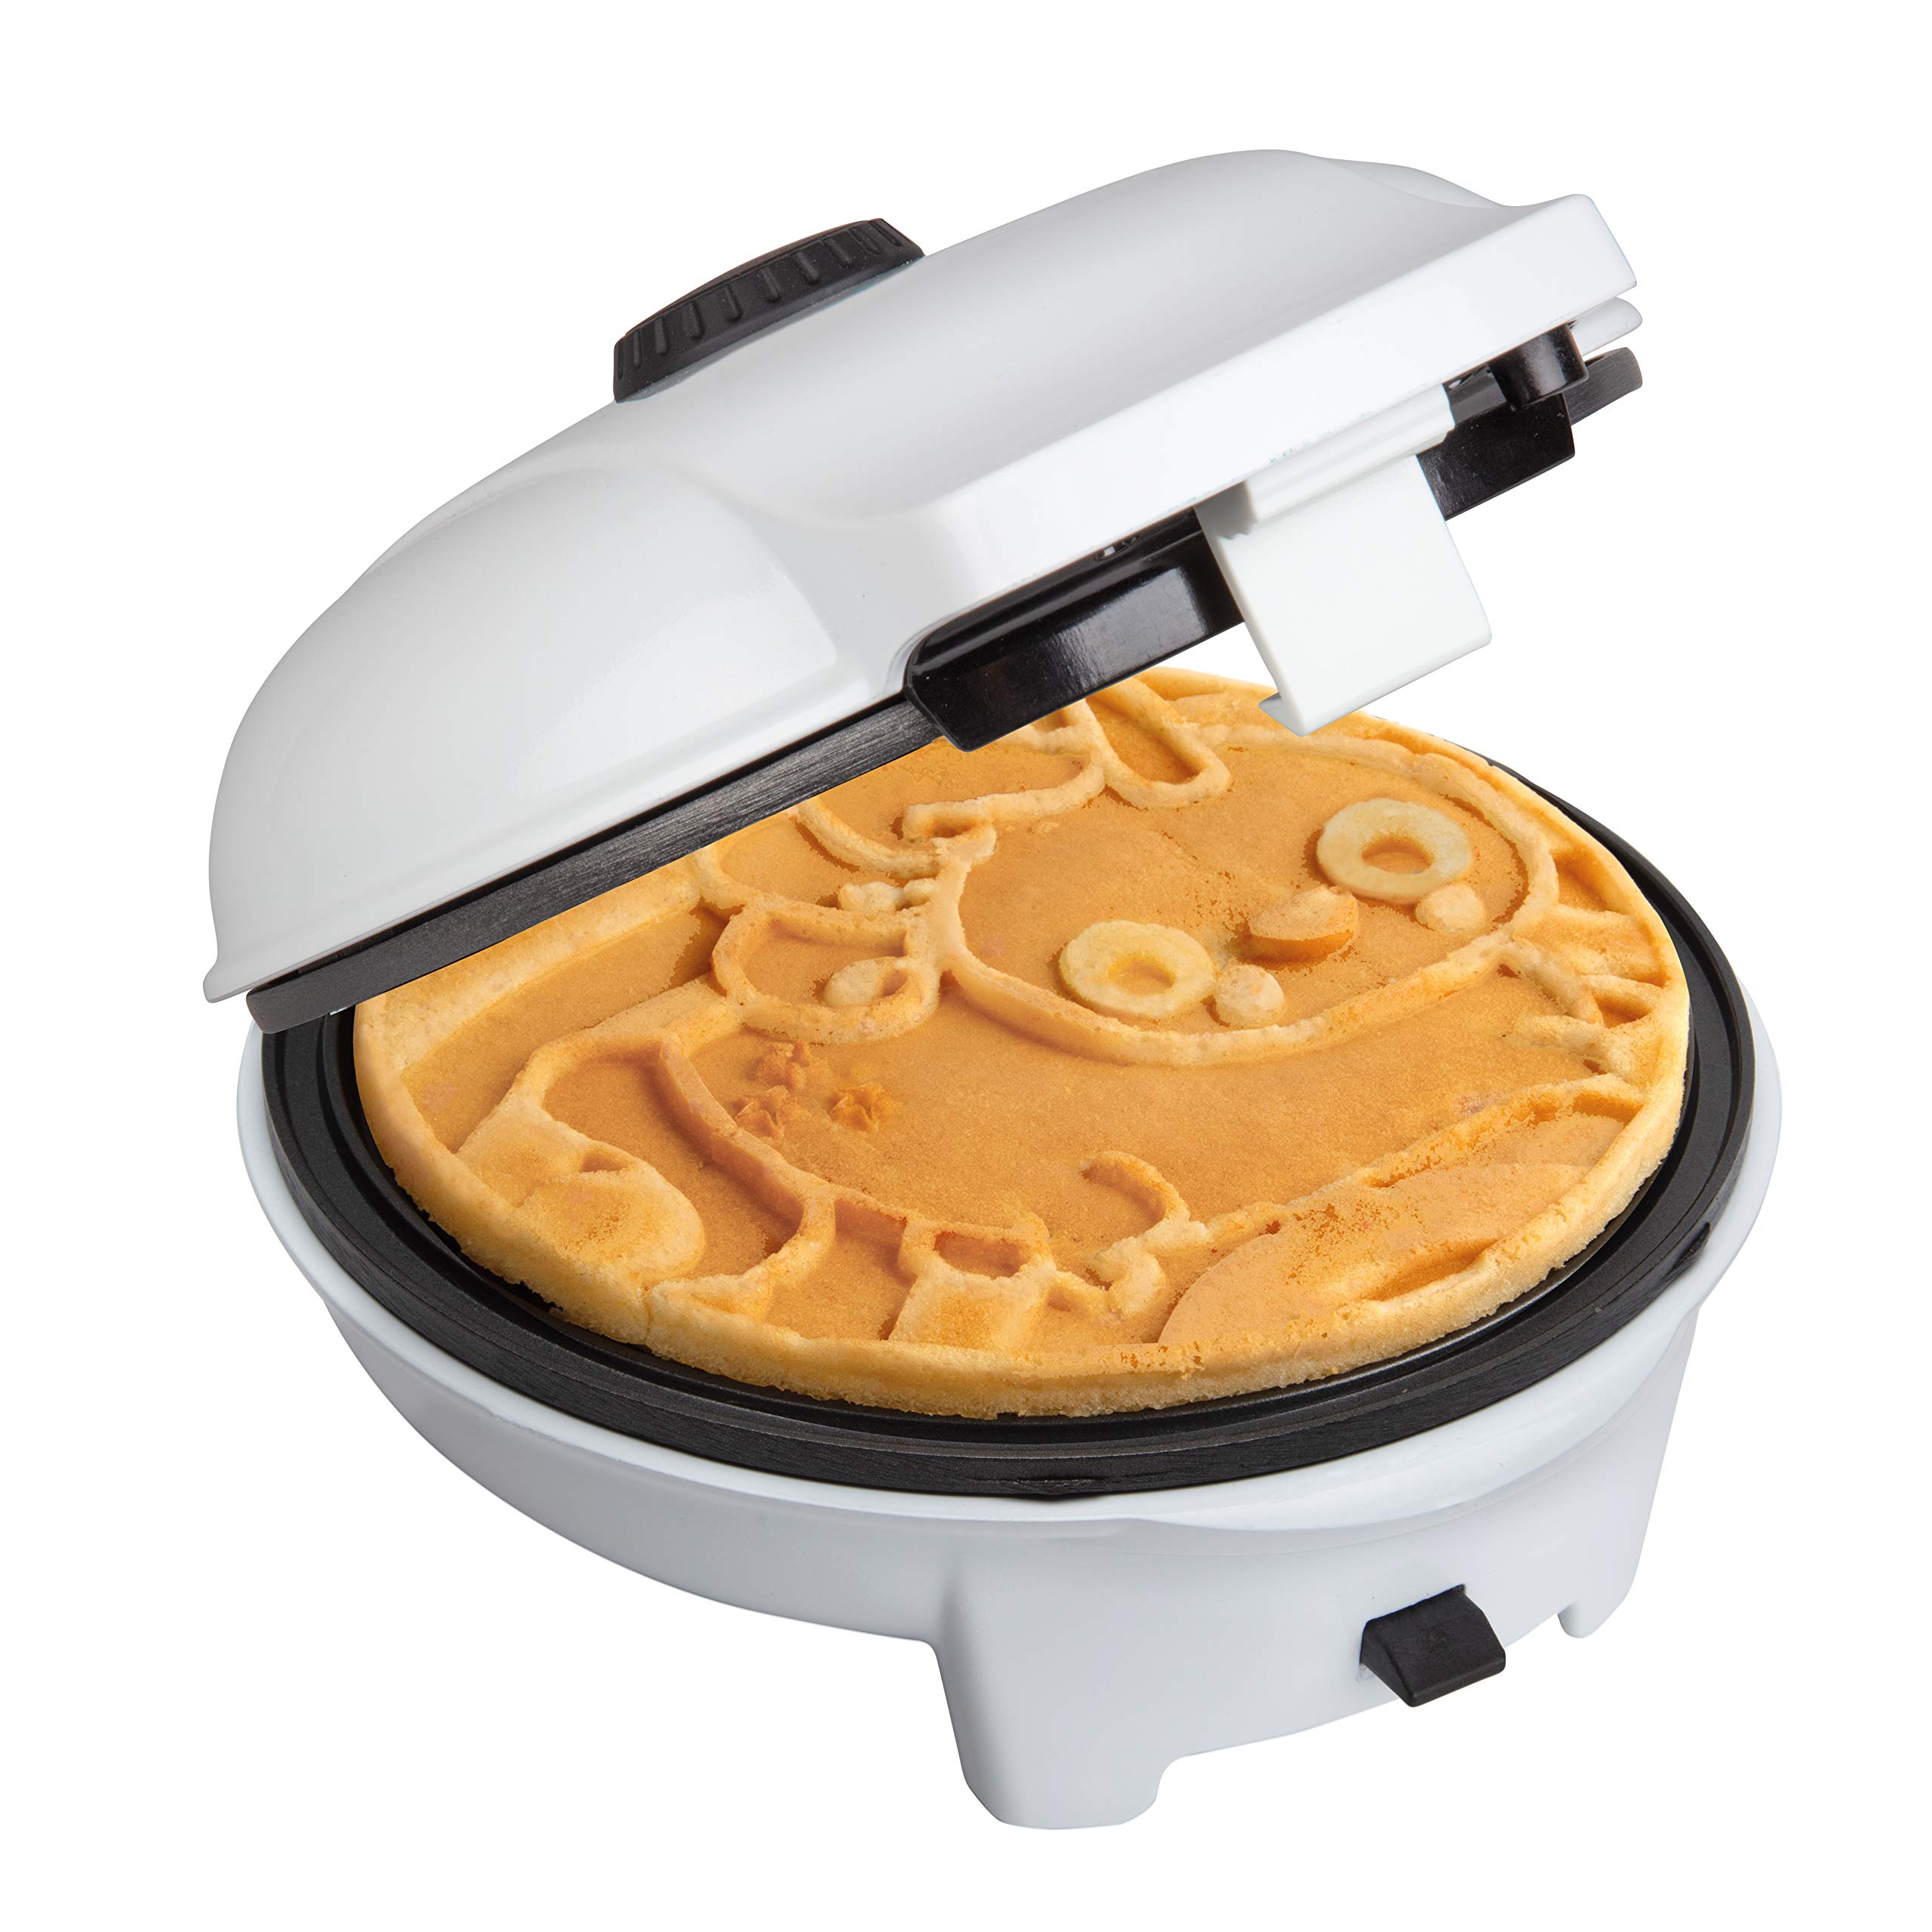 Narwhal Electric Waffle Maker w Removable Unicorn Plate for Easy Cleanup- Makes 8" Waffles or Pancakes that Bring Kids Breakfast Smiles- Non-Stick Waffler Griddle, Adjustable Temp Control, Girls Gift